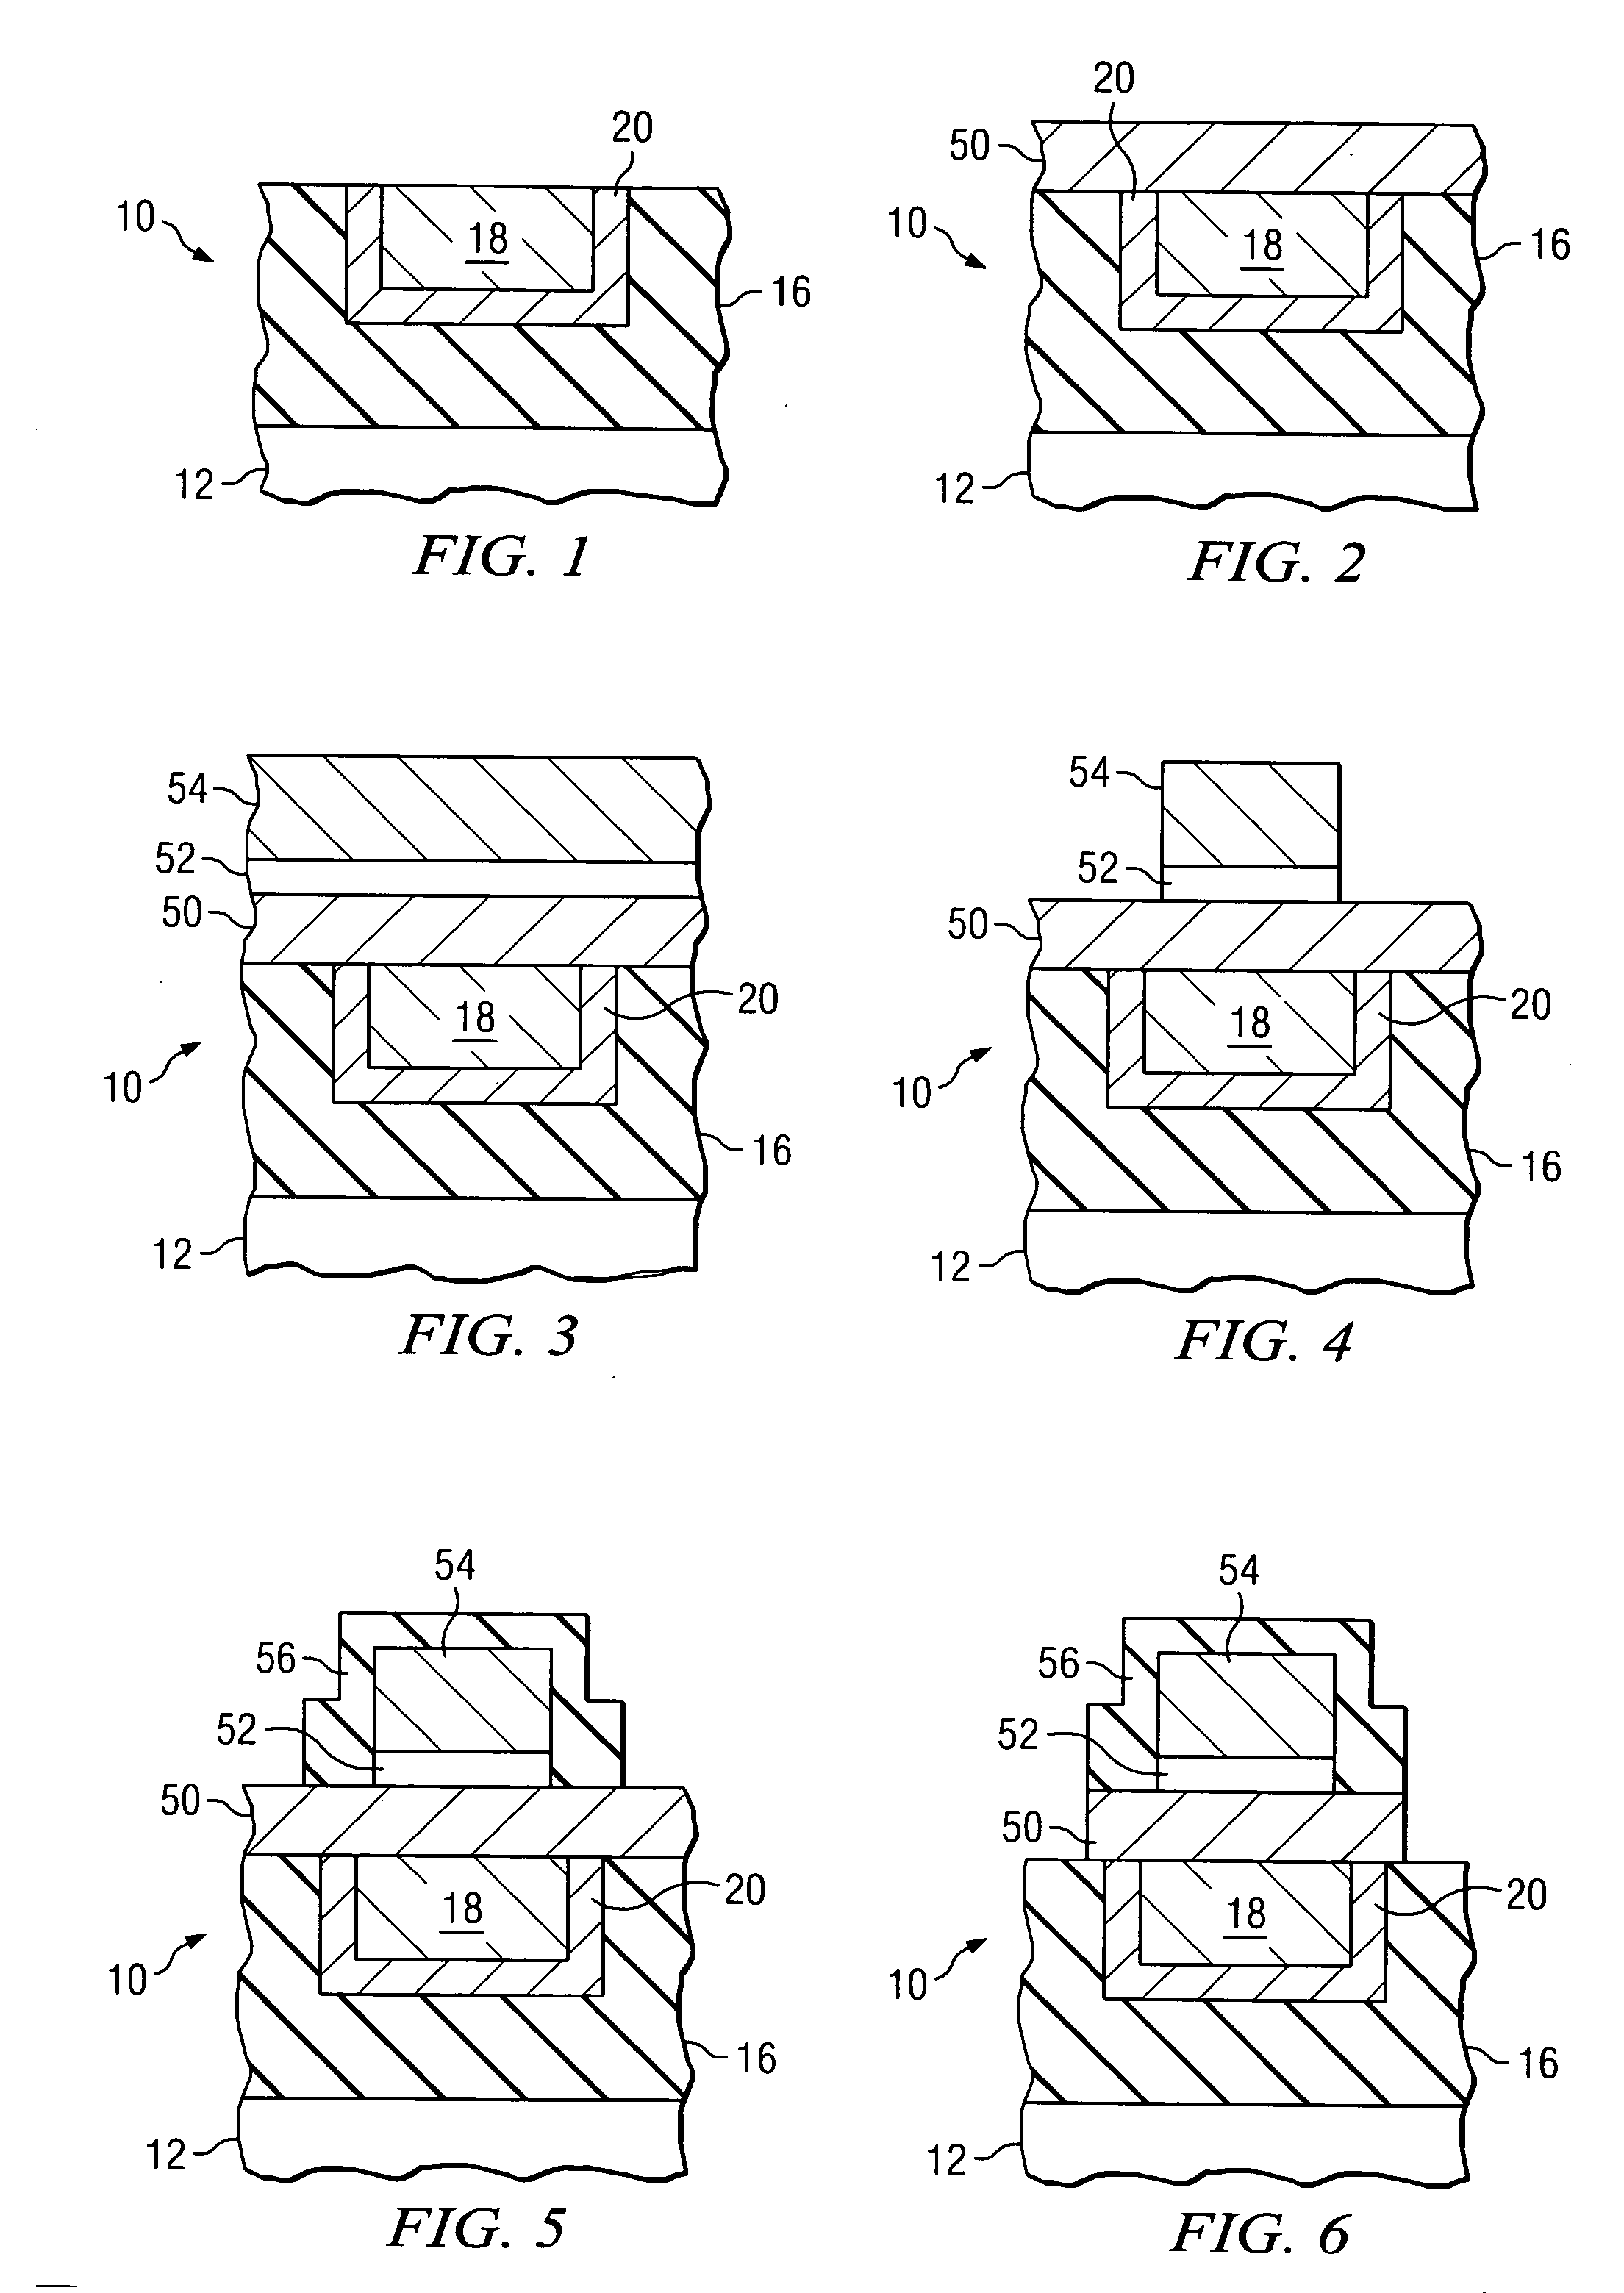 Encapsulation of conductive lines of semiconductor devices